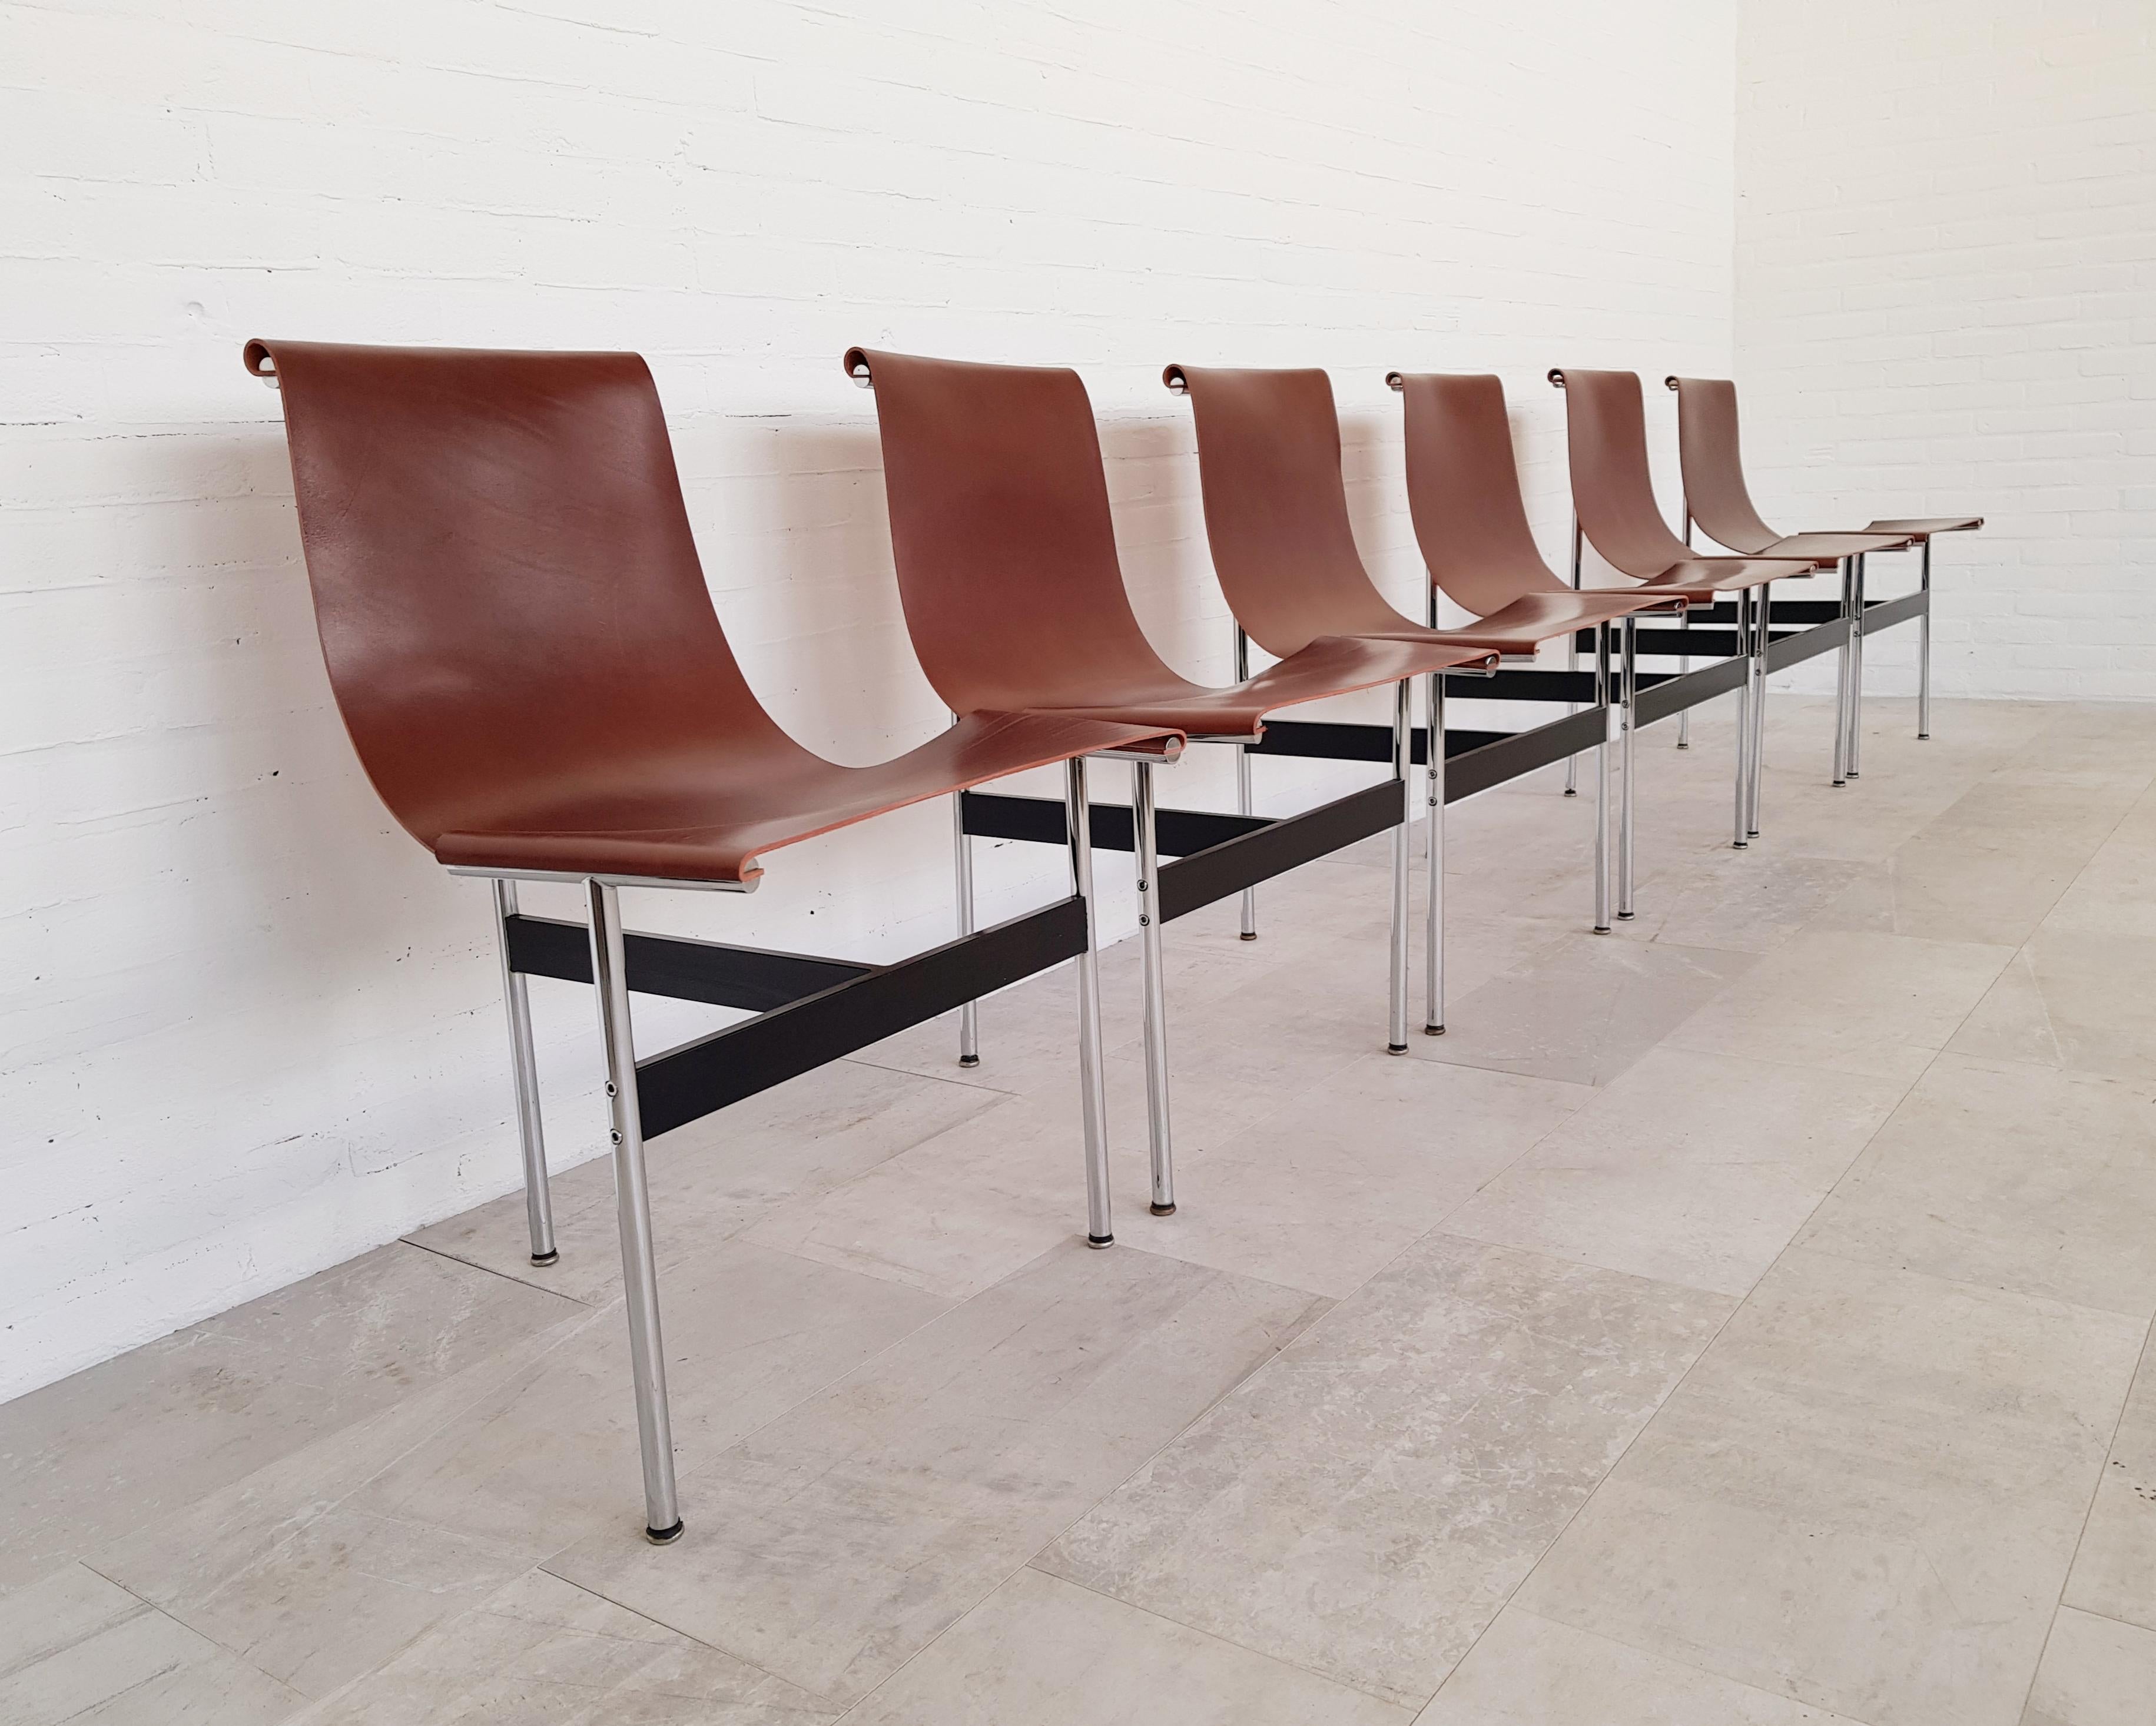 North American Brown leather original T-Chairs by Katavolos, Kelly, Littell for Laverne, 1967